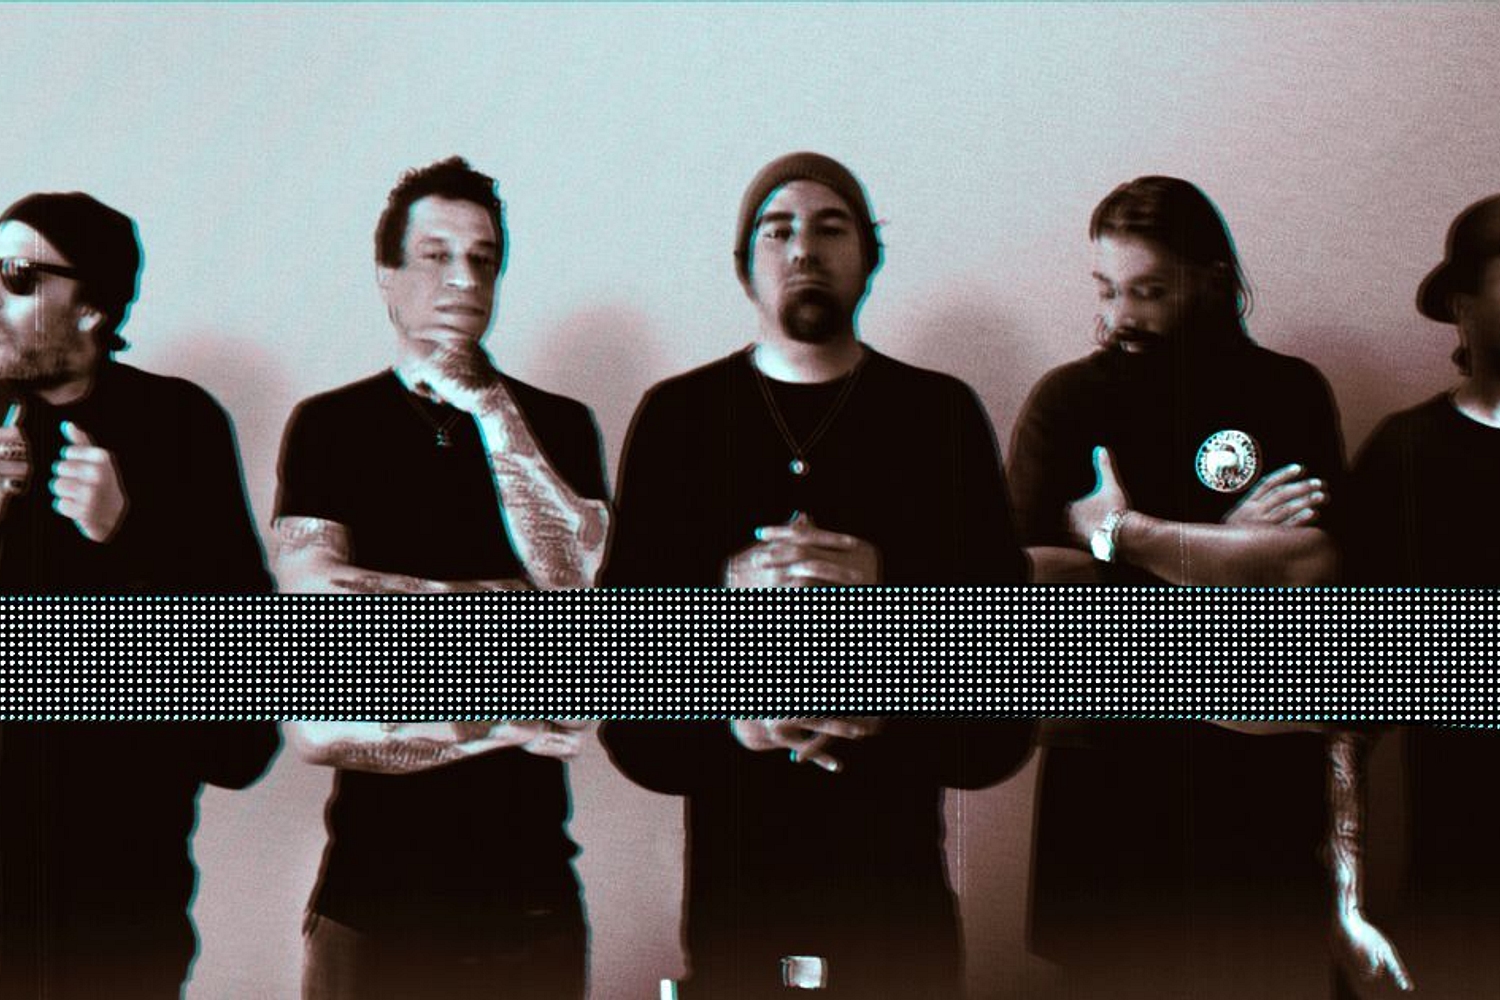 Deftones reveal the video for ‘Ceremony’